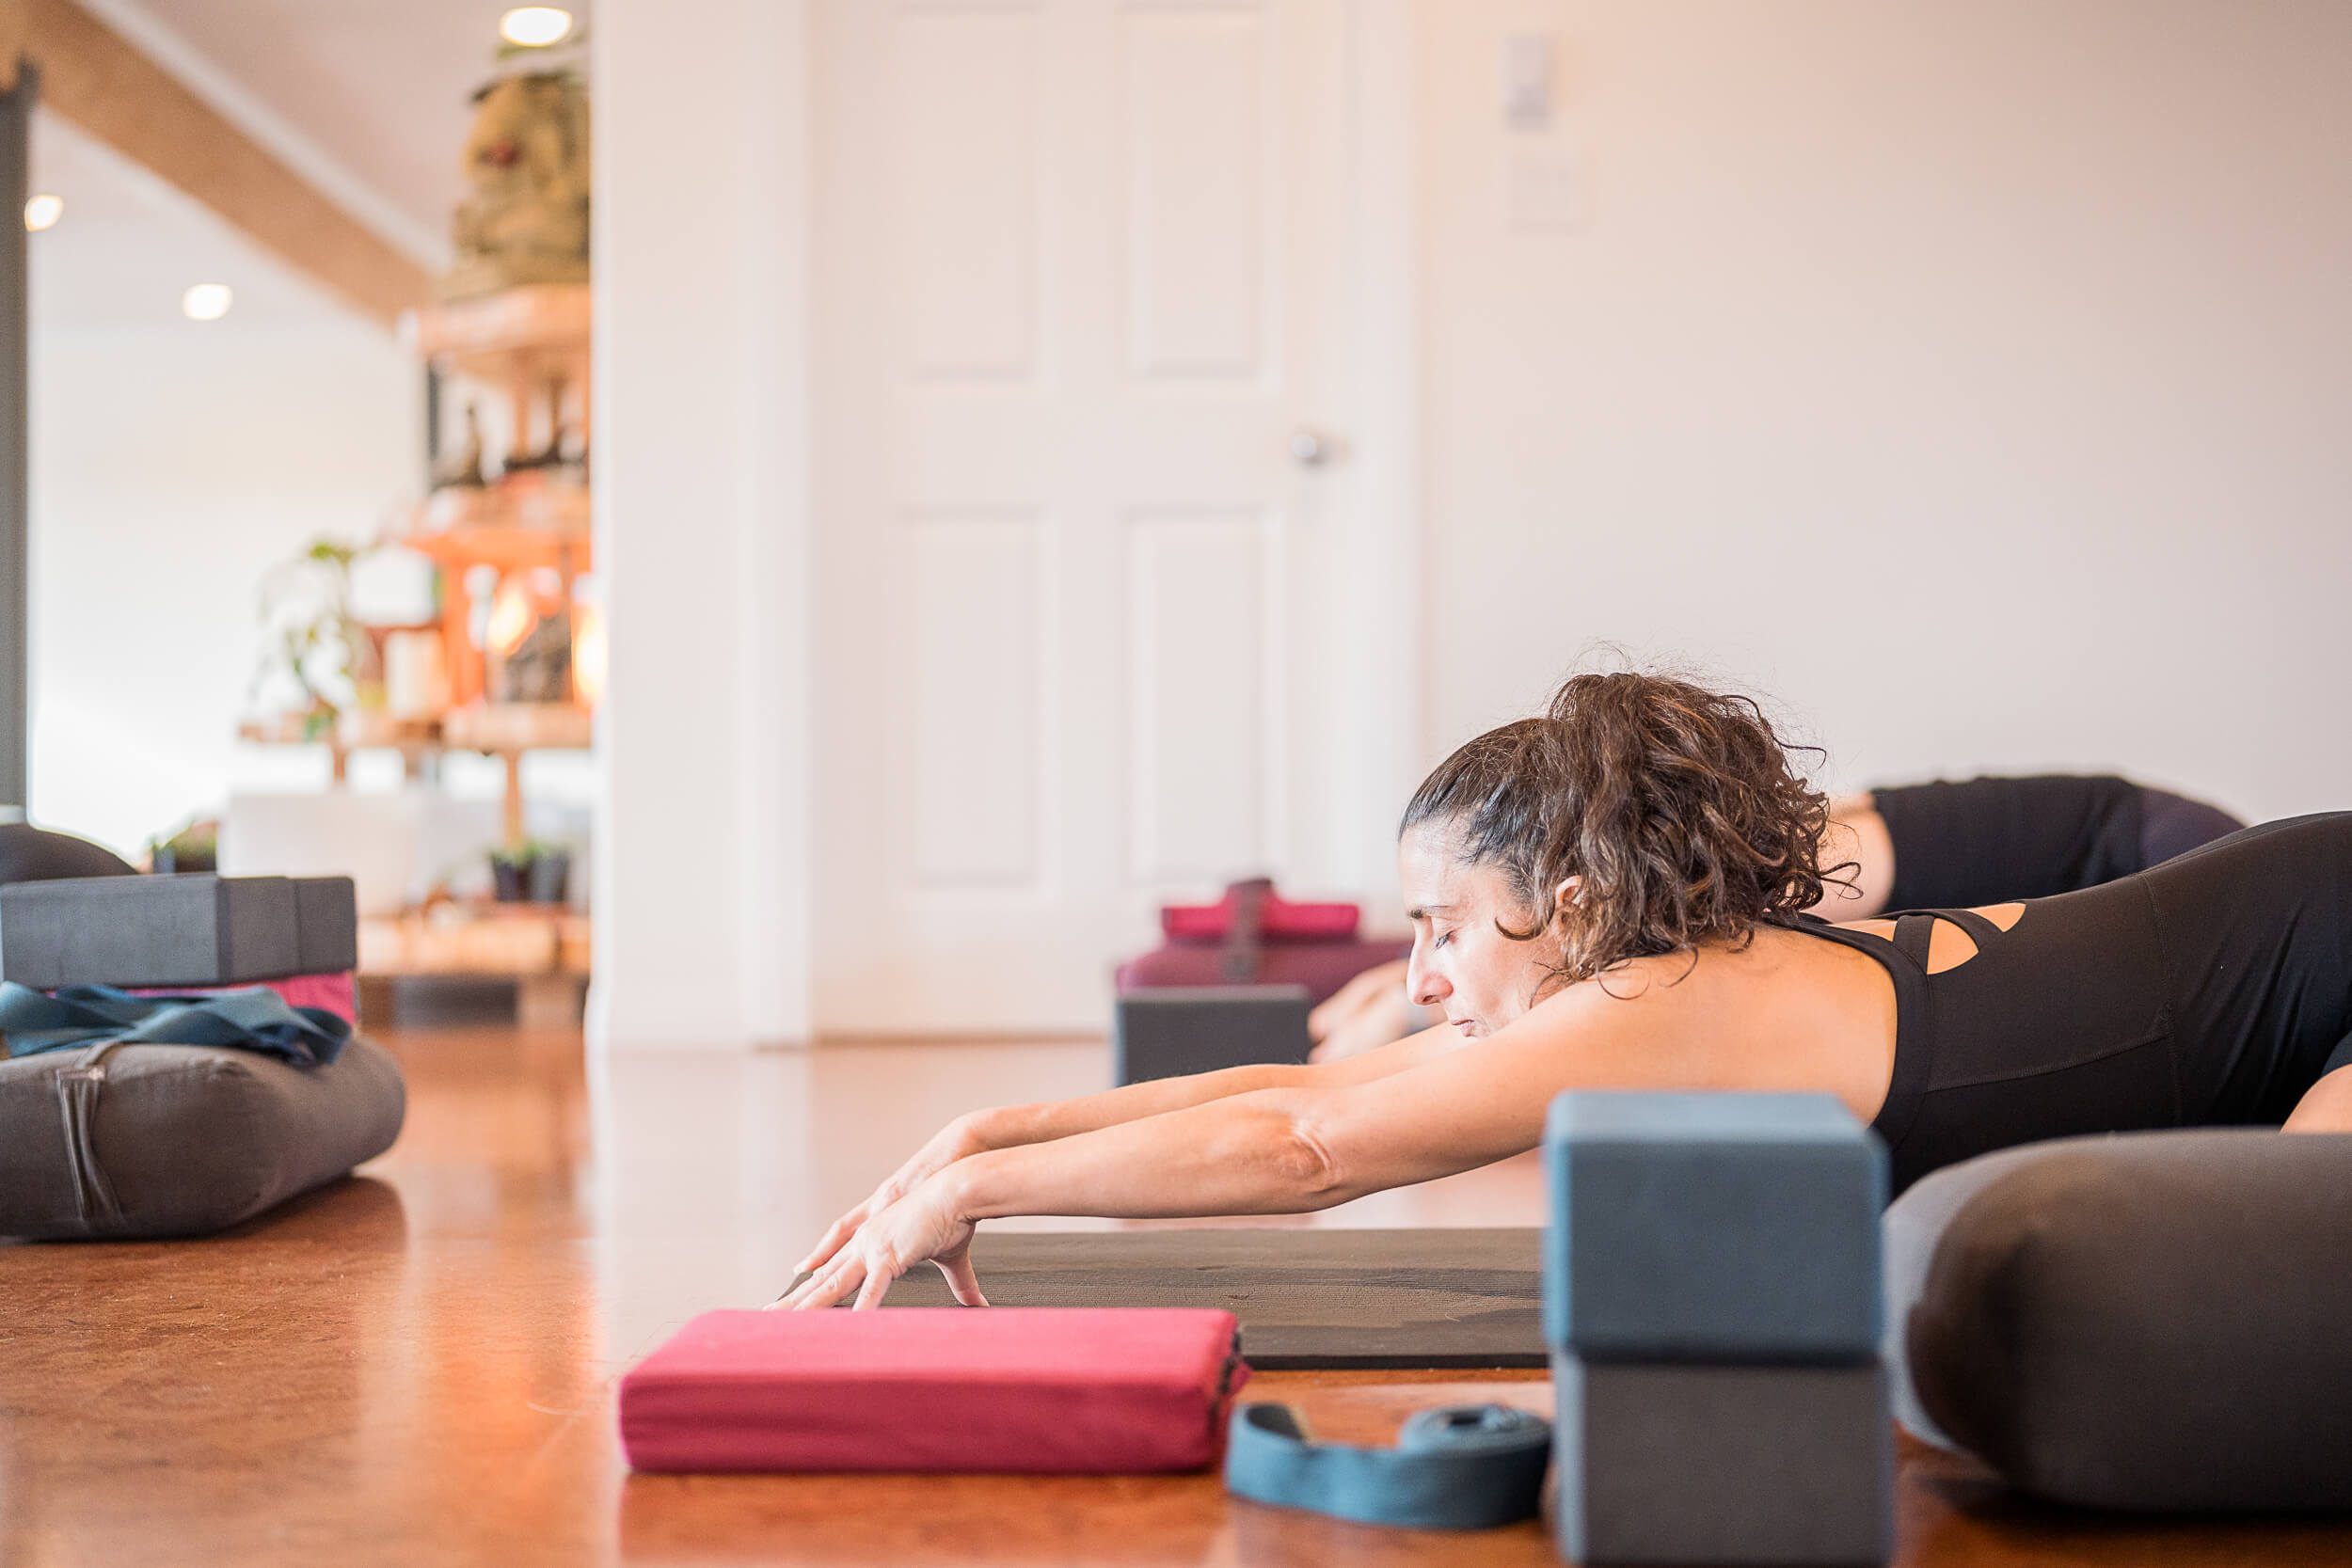 Yoga participant in a child's pose, stretching towards a yoga block for support, in the calm, hardwood-floored practice space of Shala Yoga studio in Squamish, promoting relaxation and flexibility.